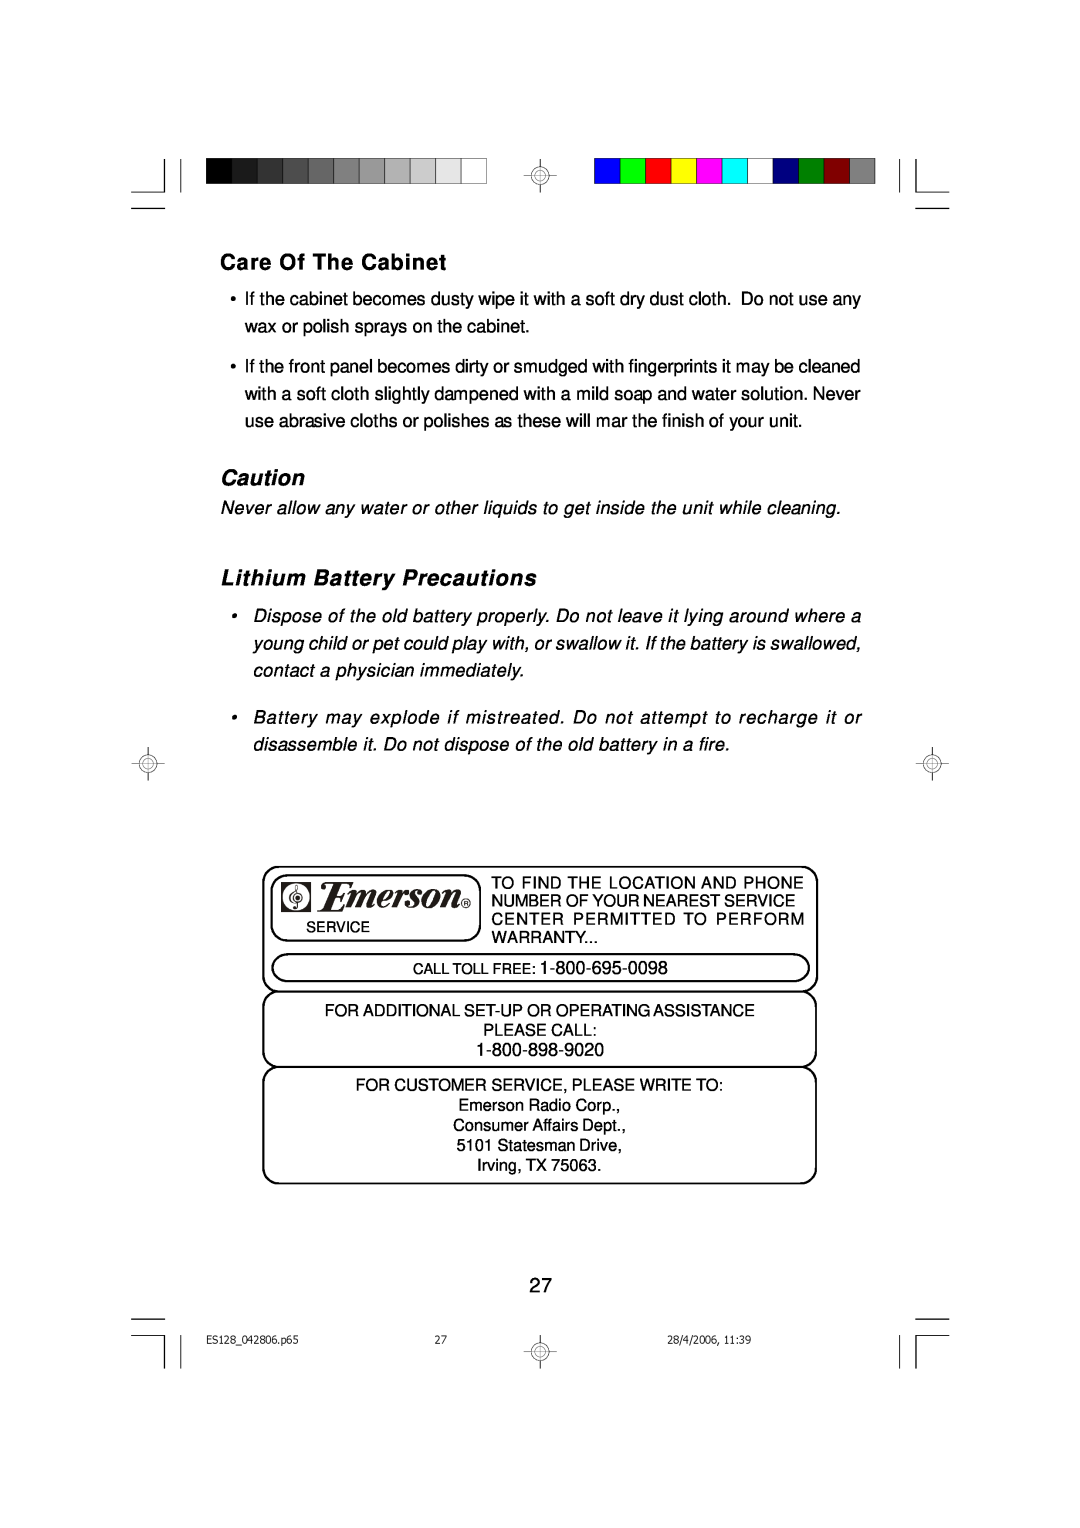 Emerson ES128 owner manual Care Of The Cabinet, Lithium Battery Precautions 